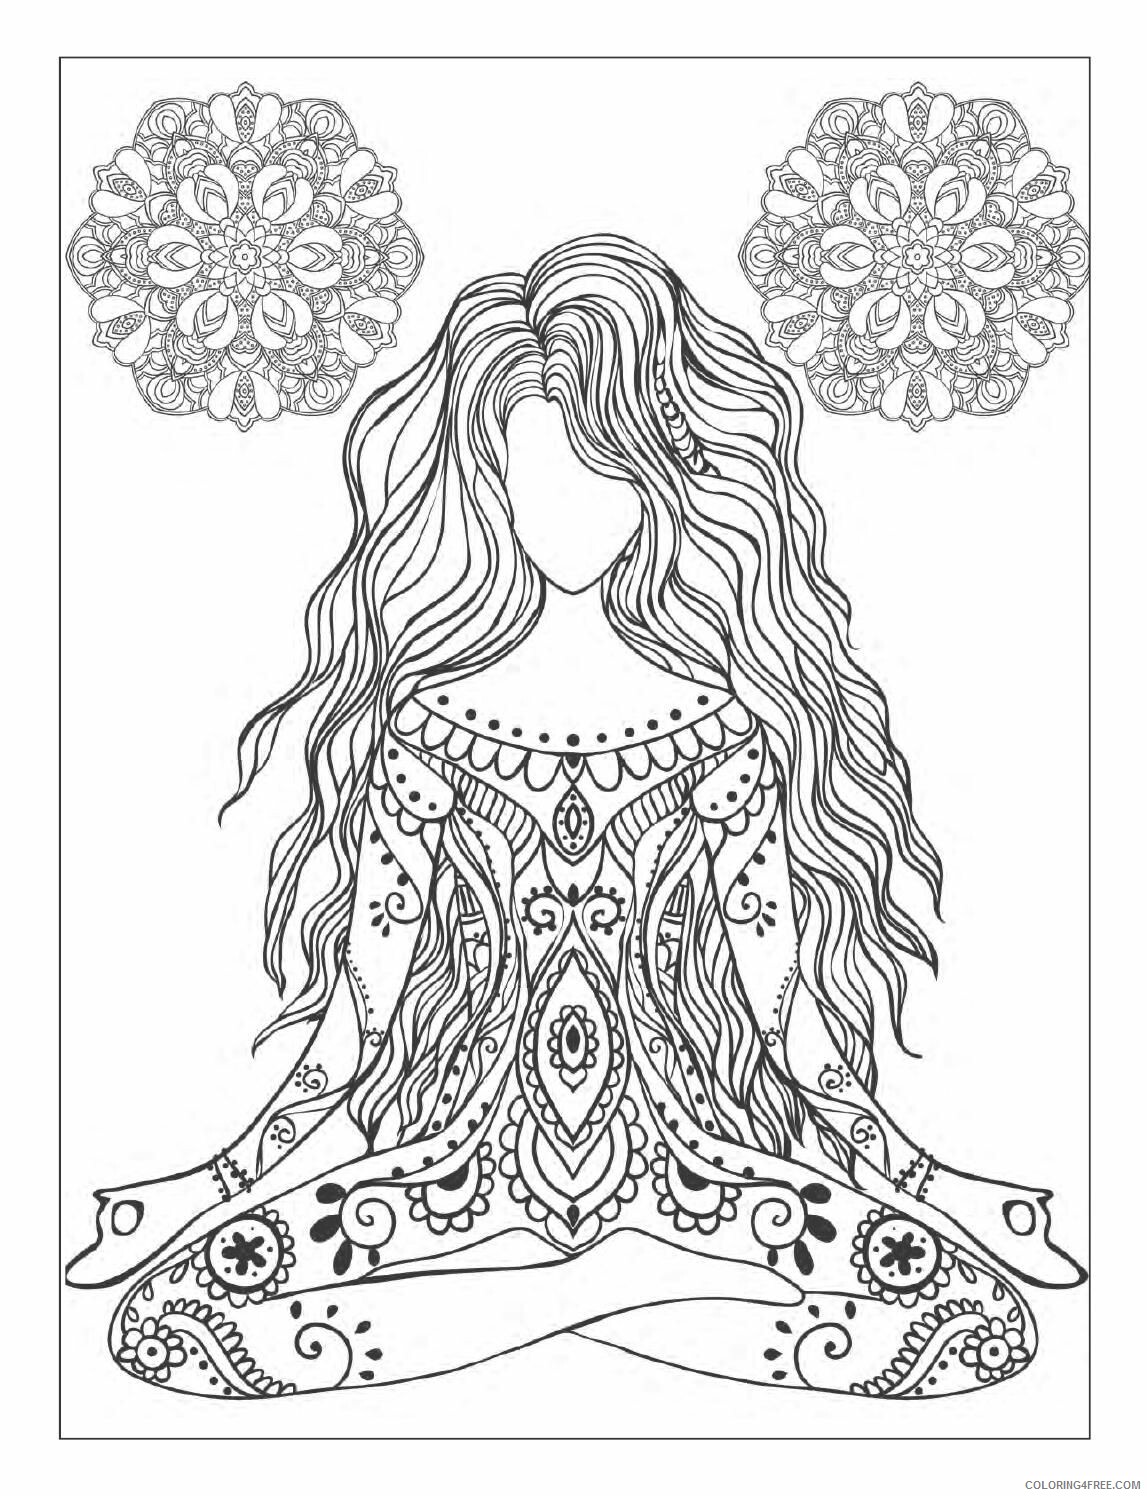 Mindfulness Coloring Pages Adult Mindfulness Mediation Printable 2020 661 Coloring4free